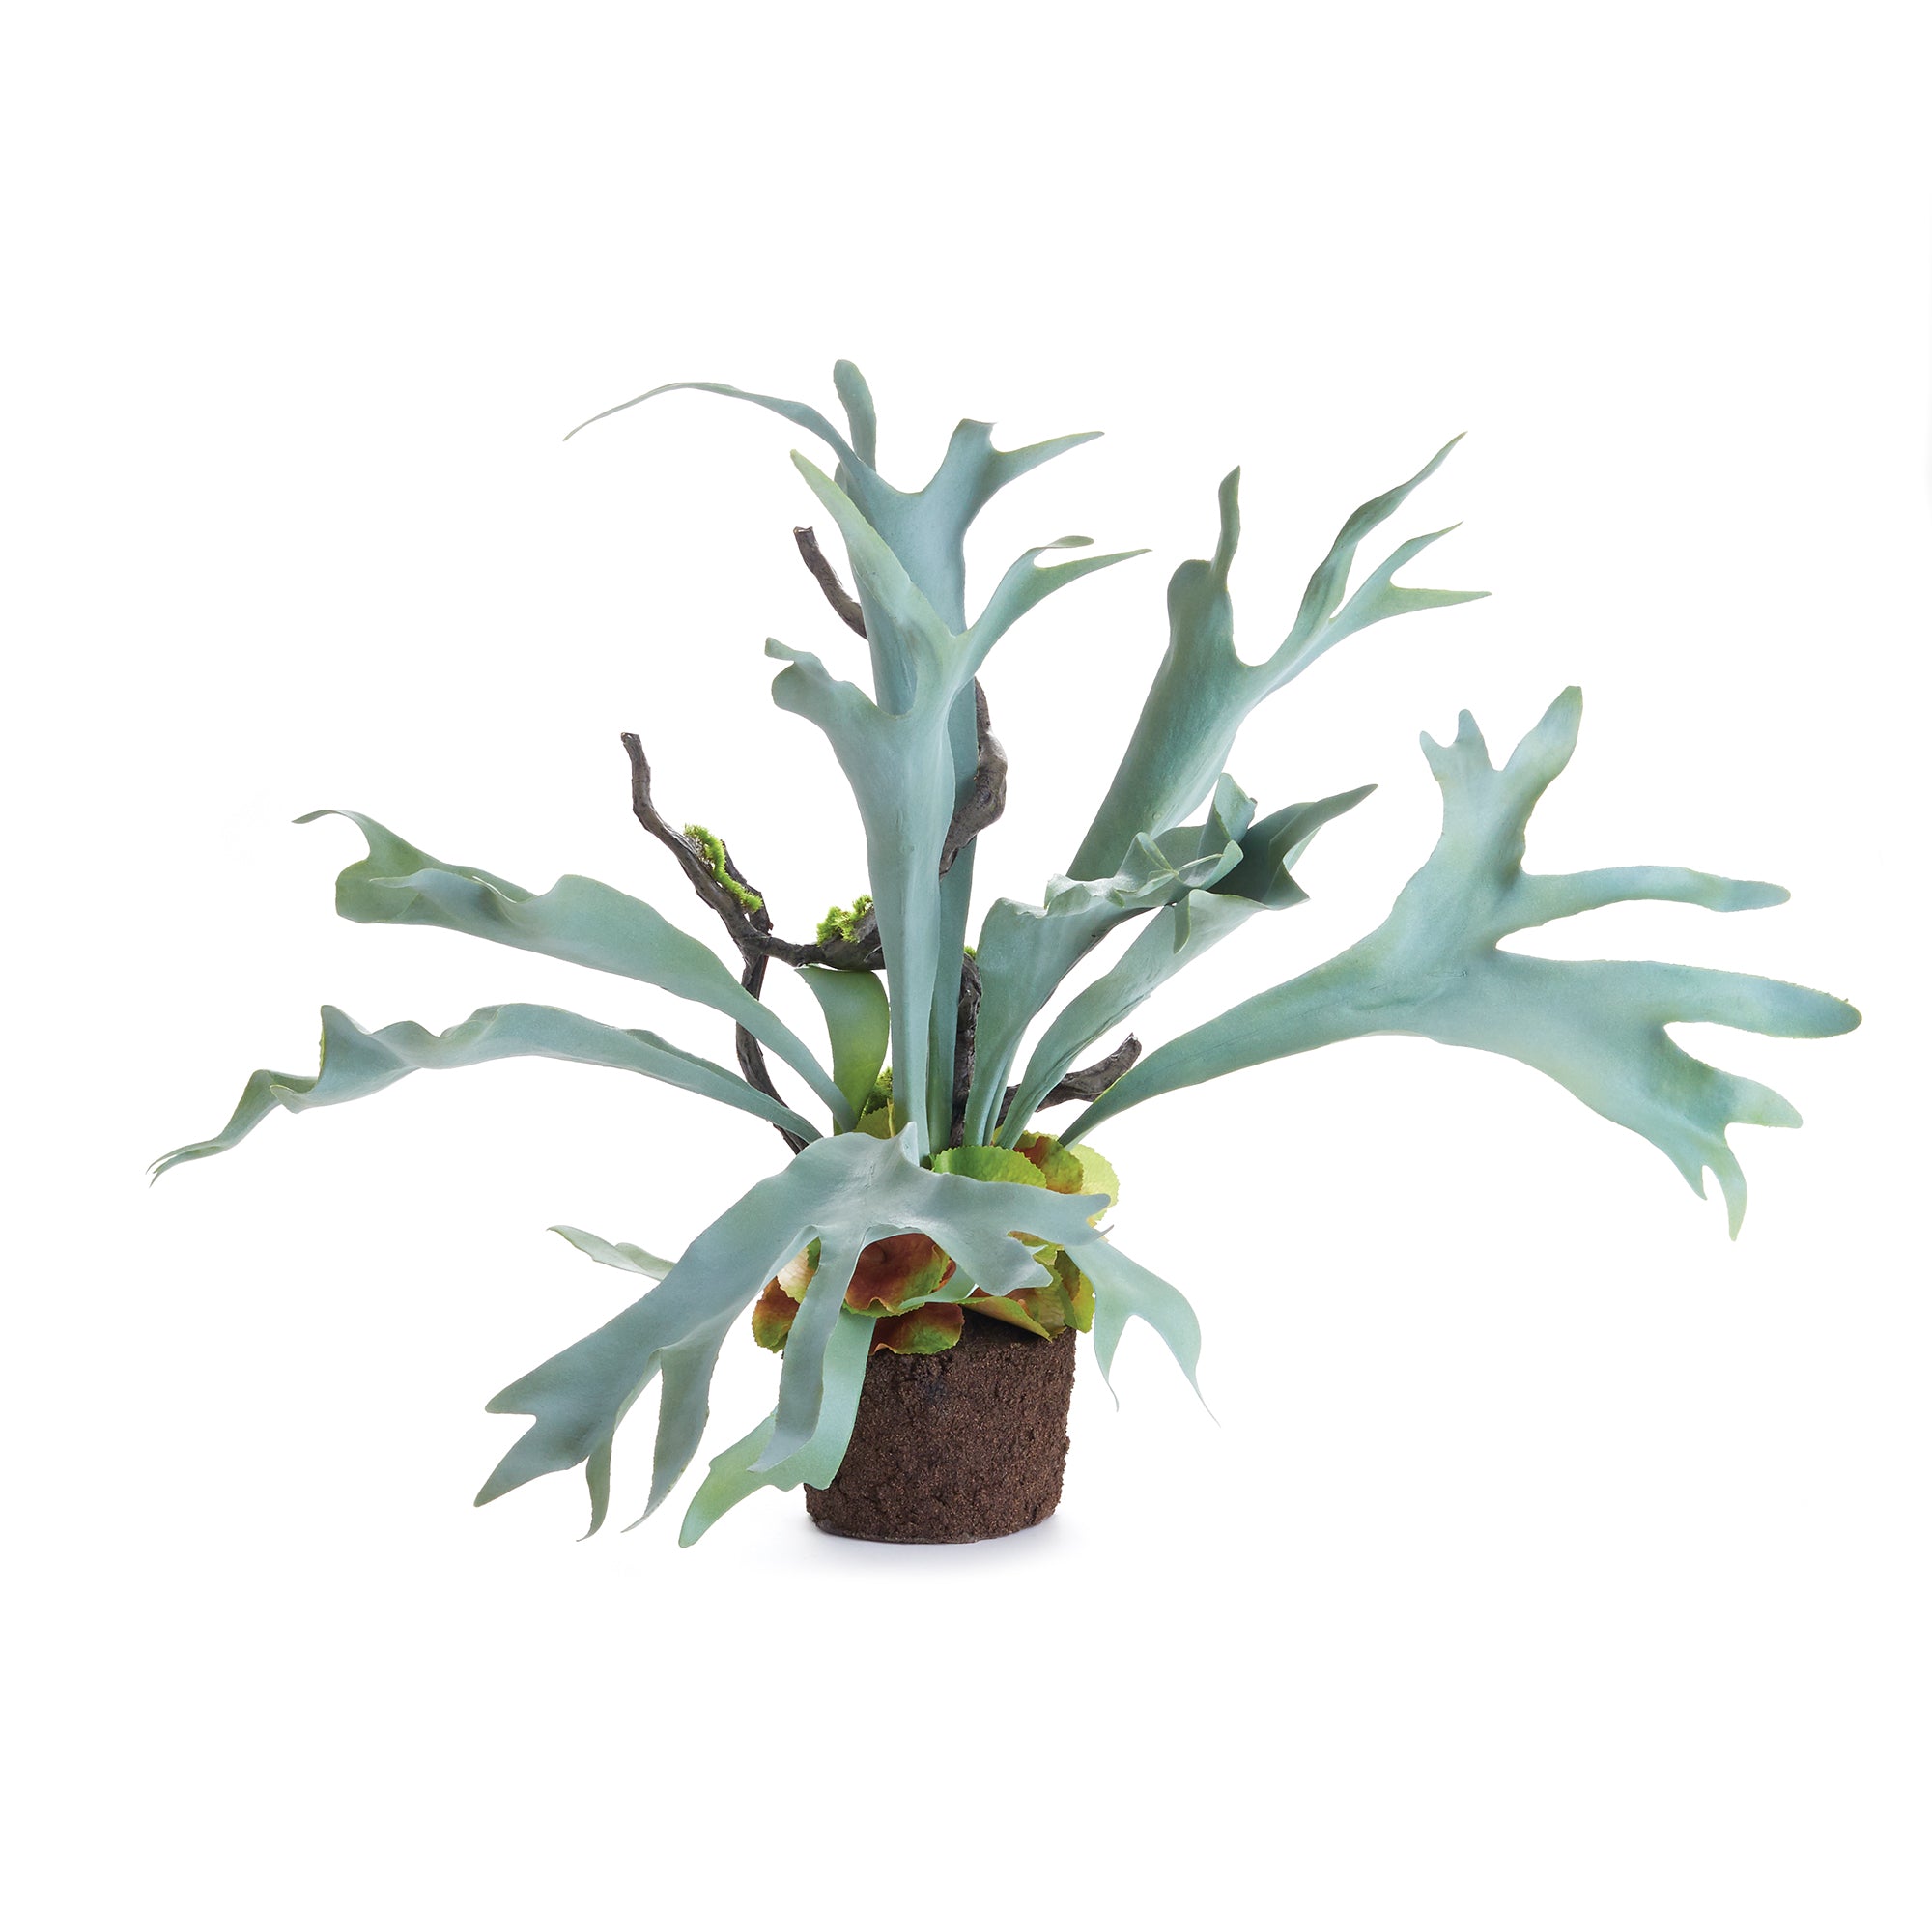 The Staghorn Fern is full of high drama, and sure to be a conversation starter. Typically found in wall configurations, we bring this uniquely free-standing beauty to the table. Amethyst Home provides interior design, new construction, custom furniture, and area rugs in the Kansas City metro area.